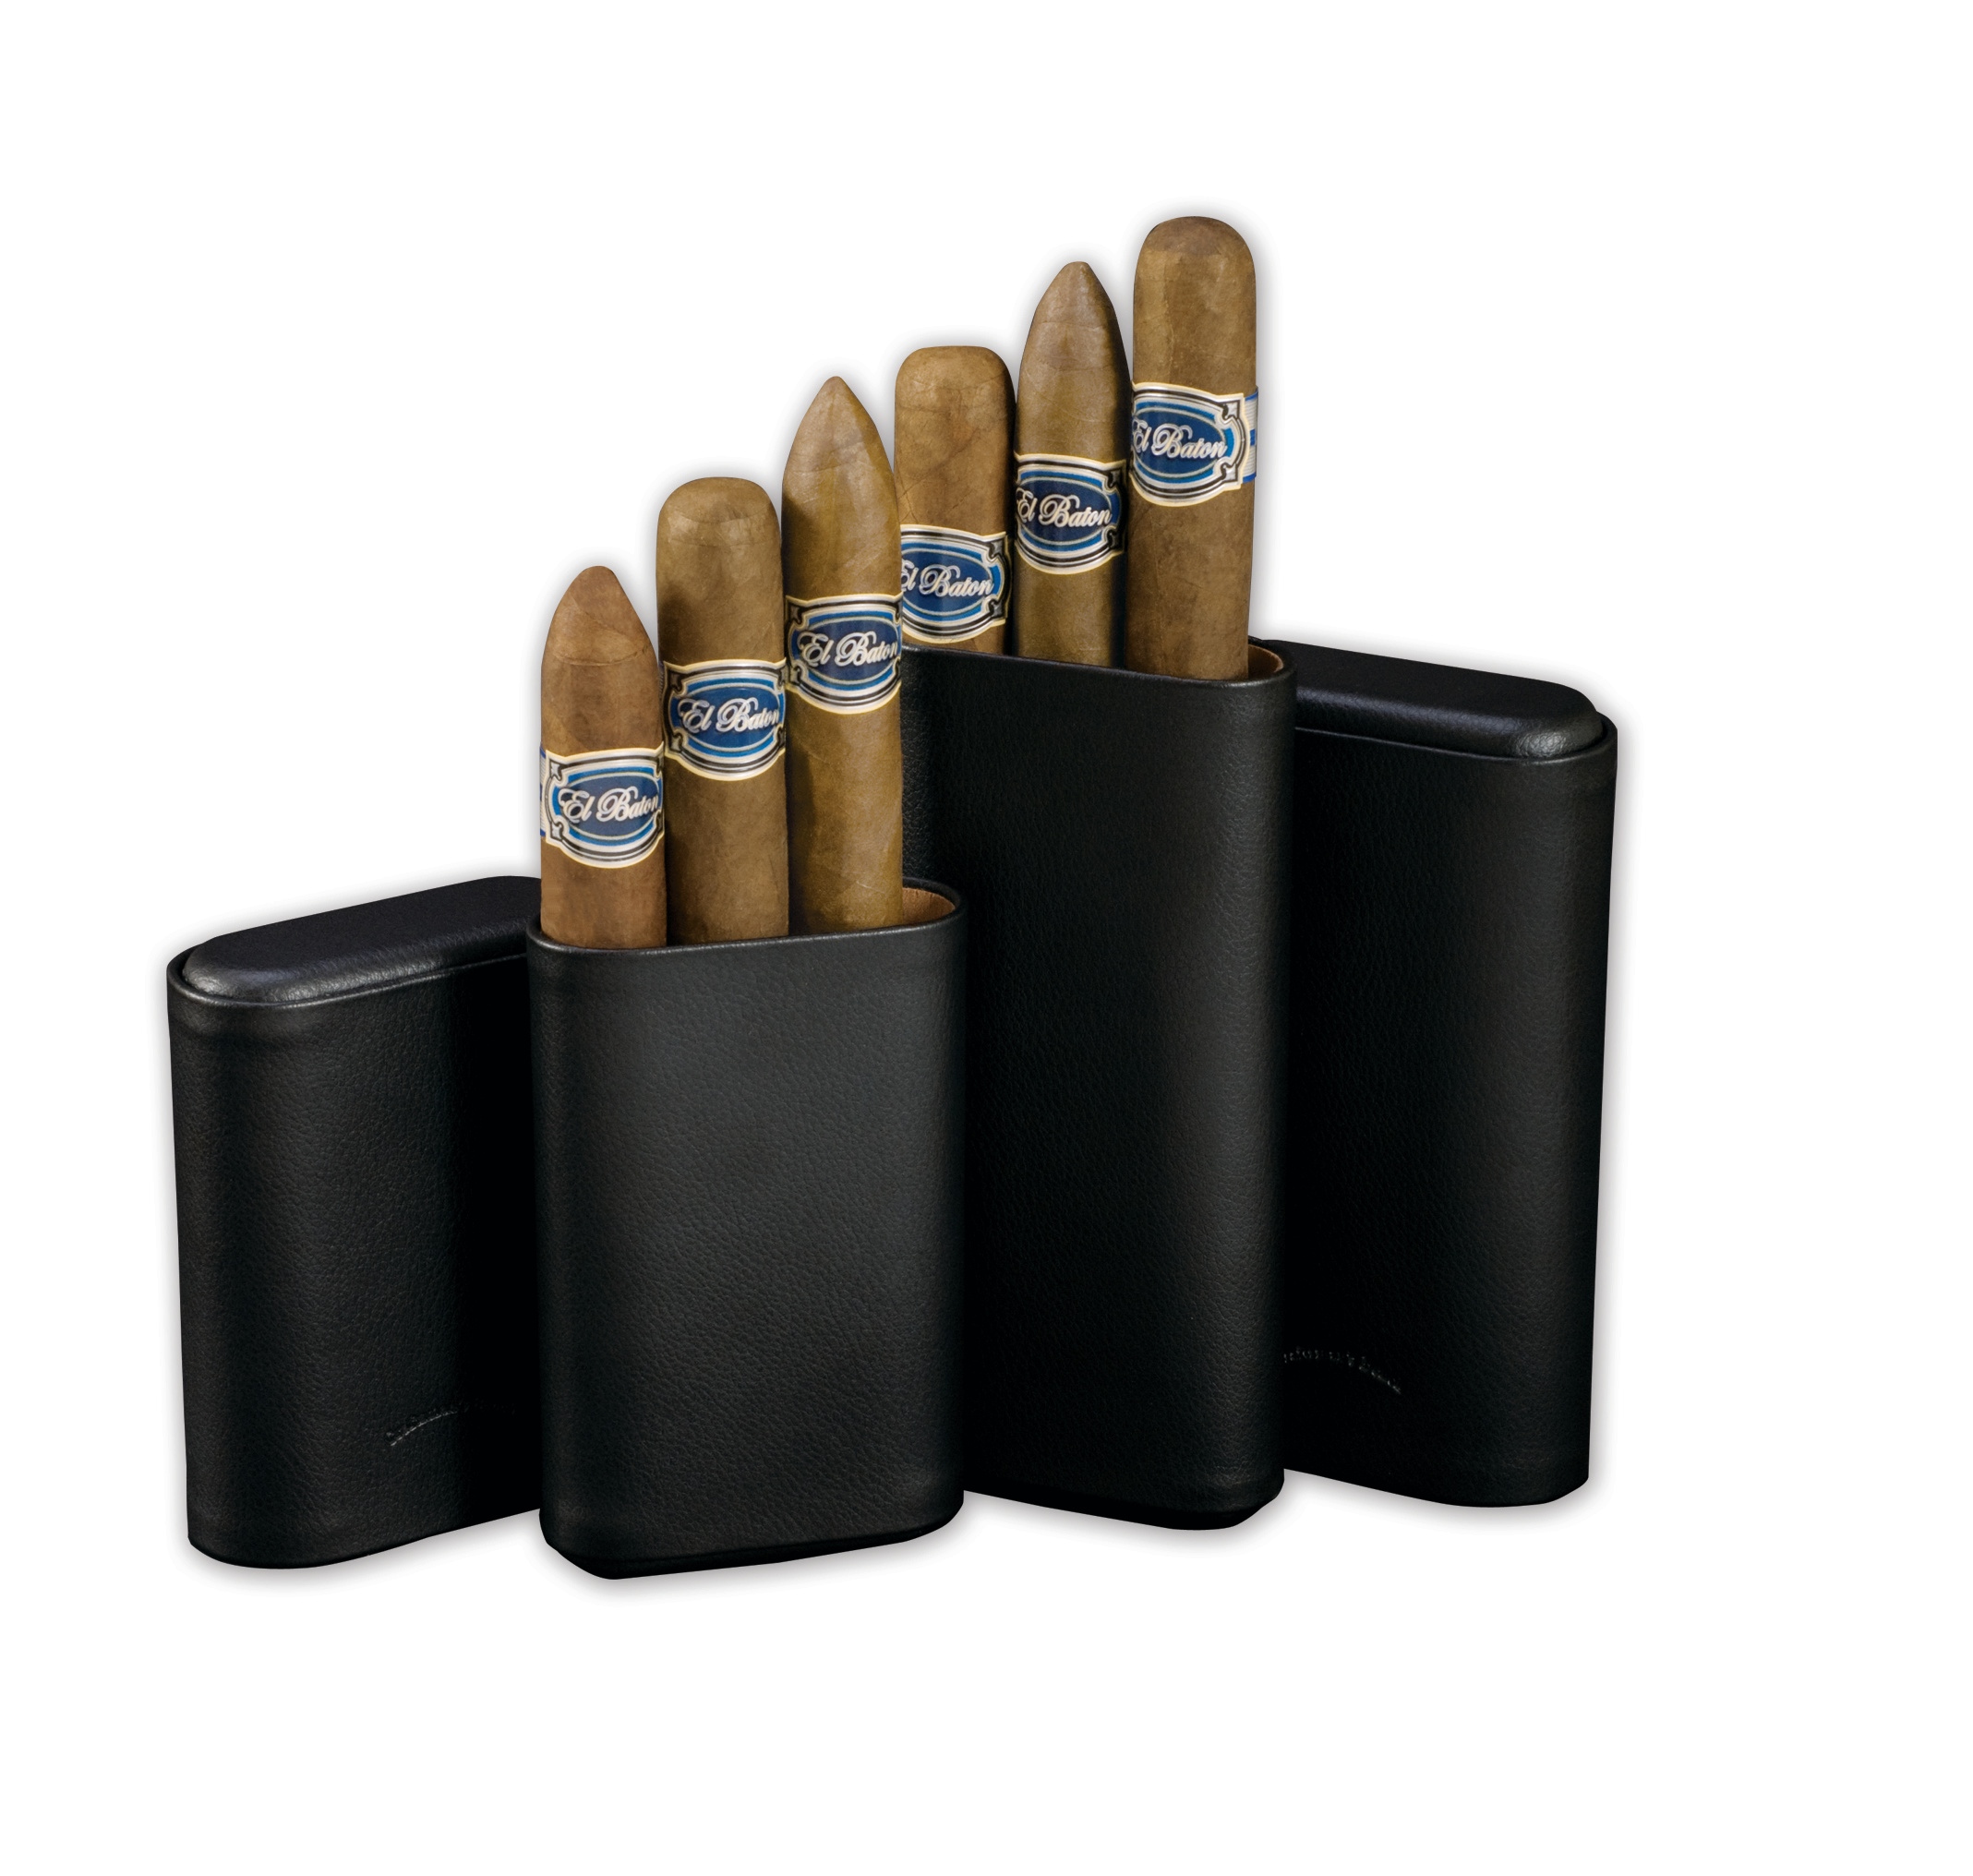 Lecerf Leather Case for 6 Cigarillos Black